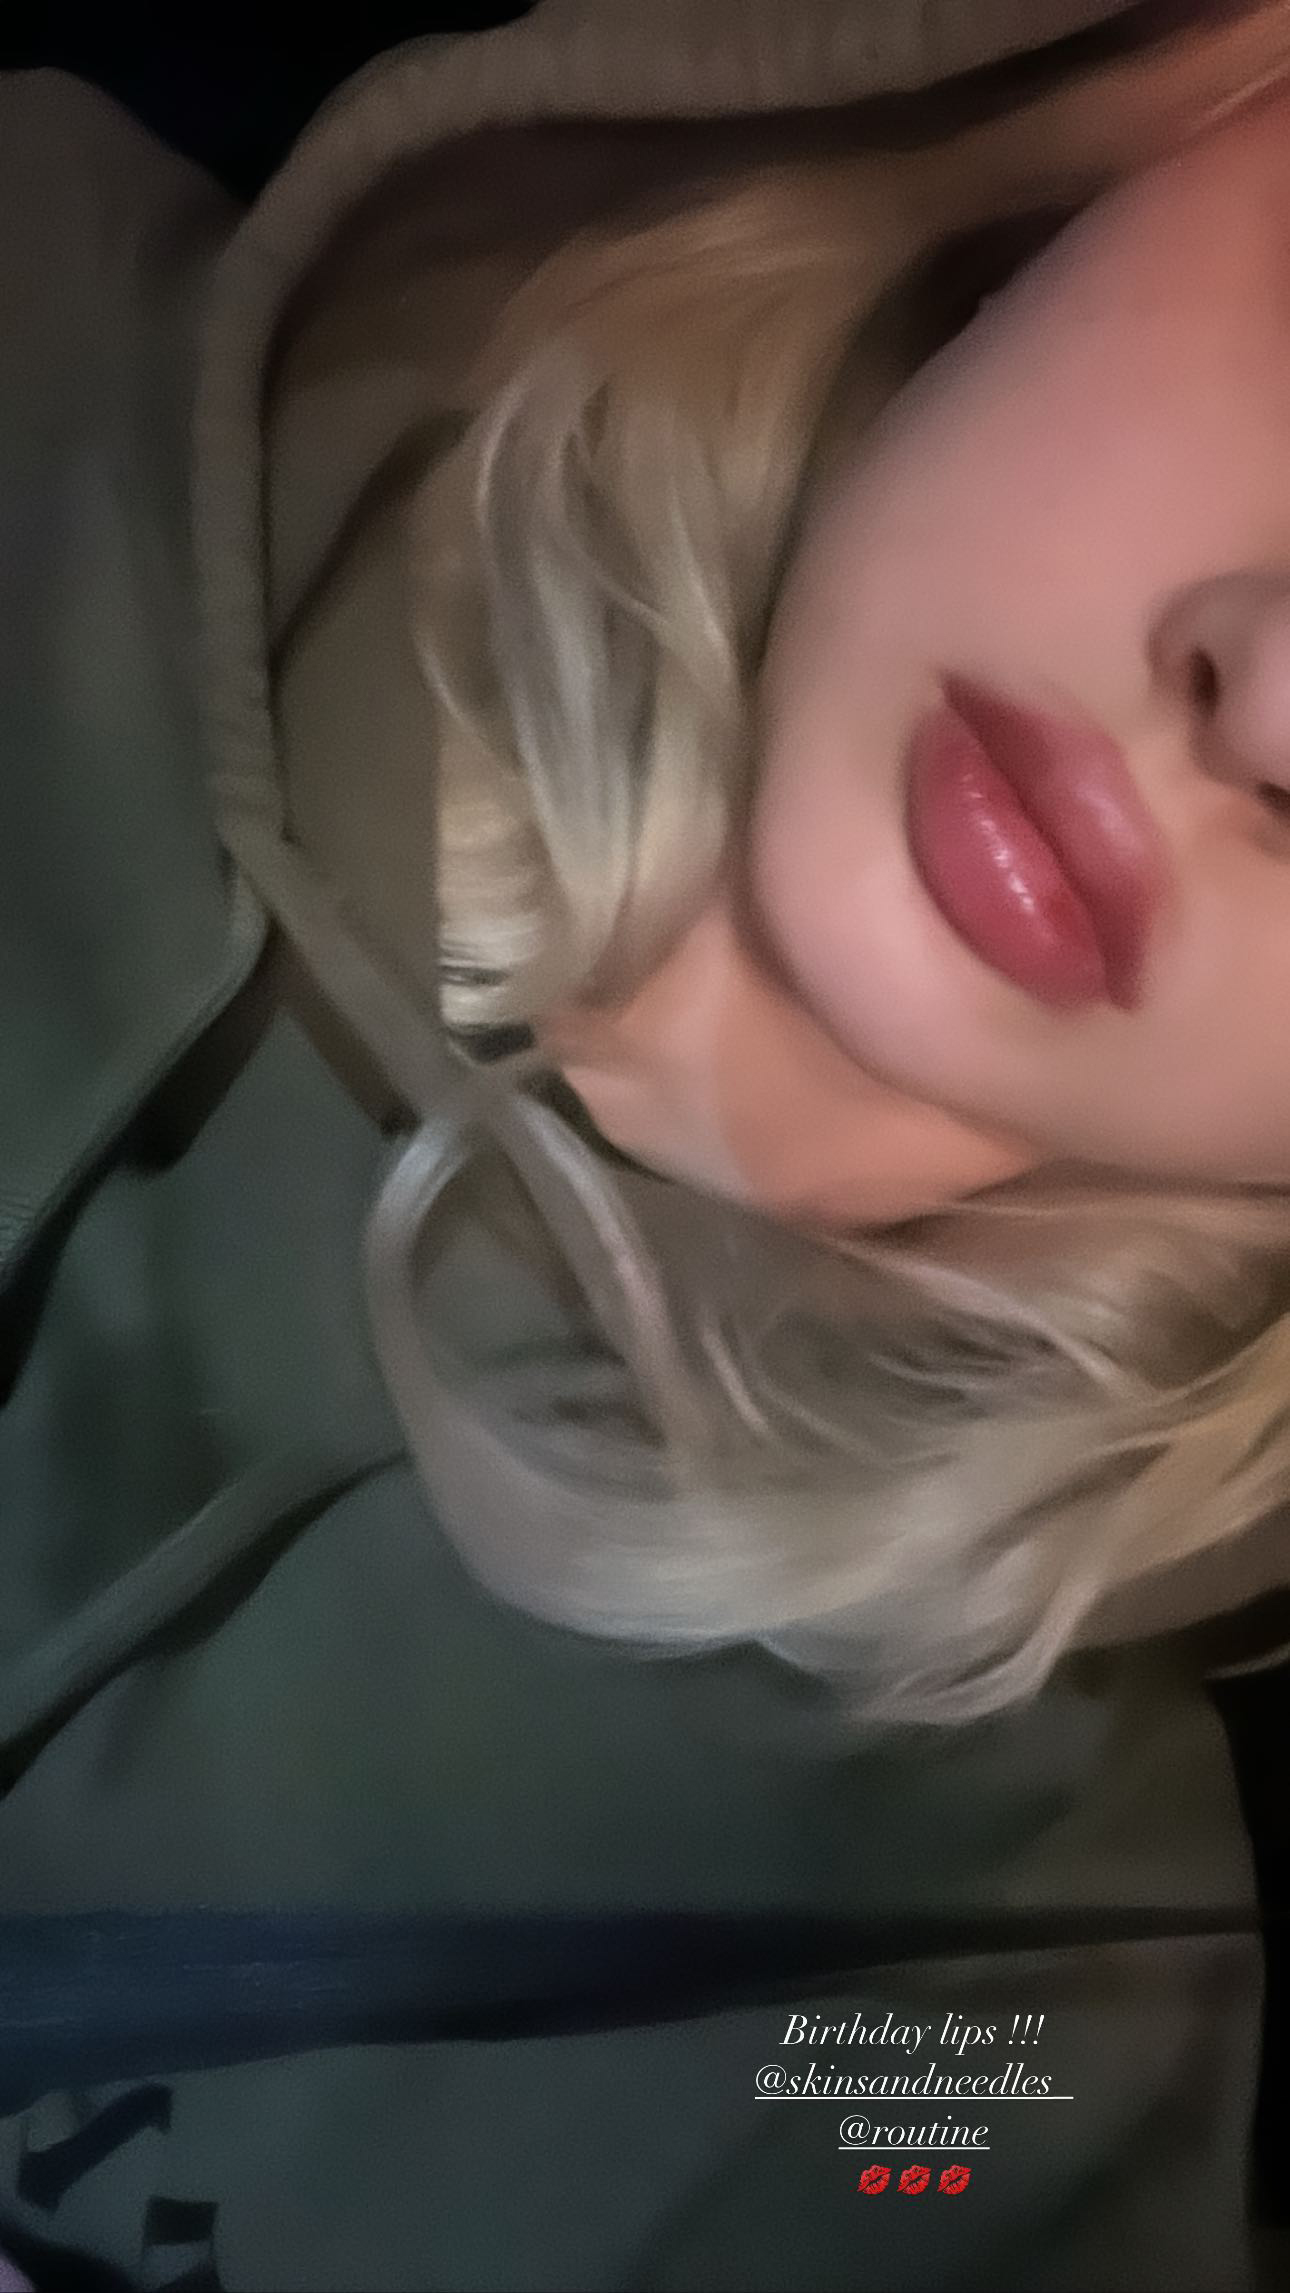 She revealed her new swollen lips in a selfie on Tuesday evening